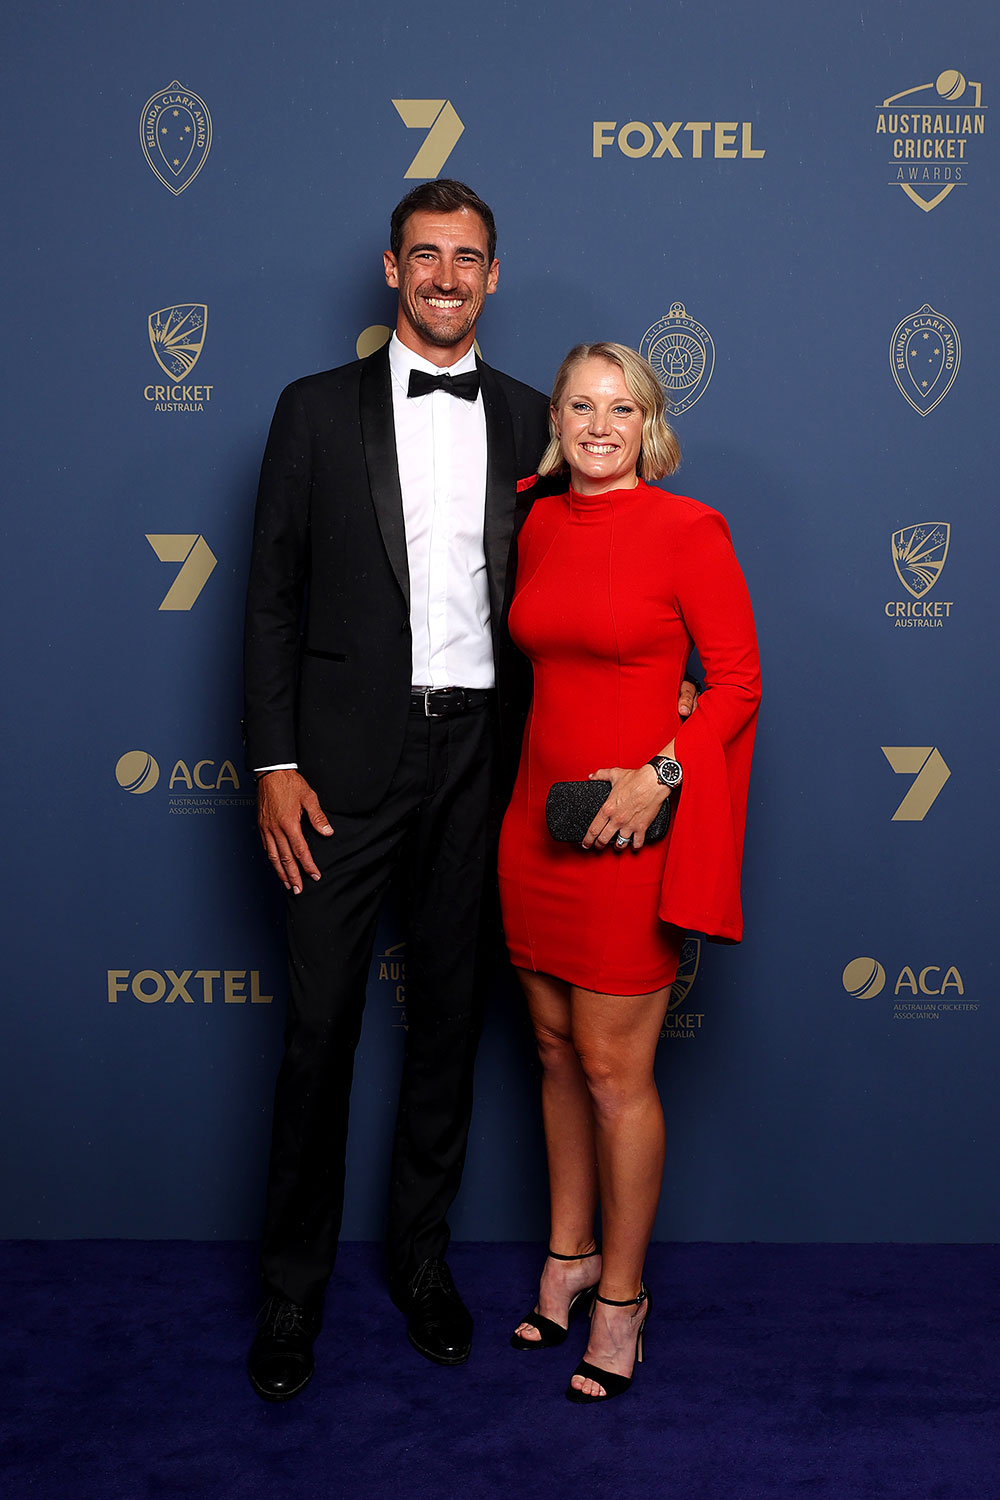 Australian Cricket Awards: Just before India vs Australian TEST Series, Watch Aussie cricketers in their MOST GLAMOROUS avatar at CA AWARDS, Steve Smith WINS